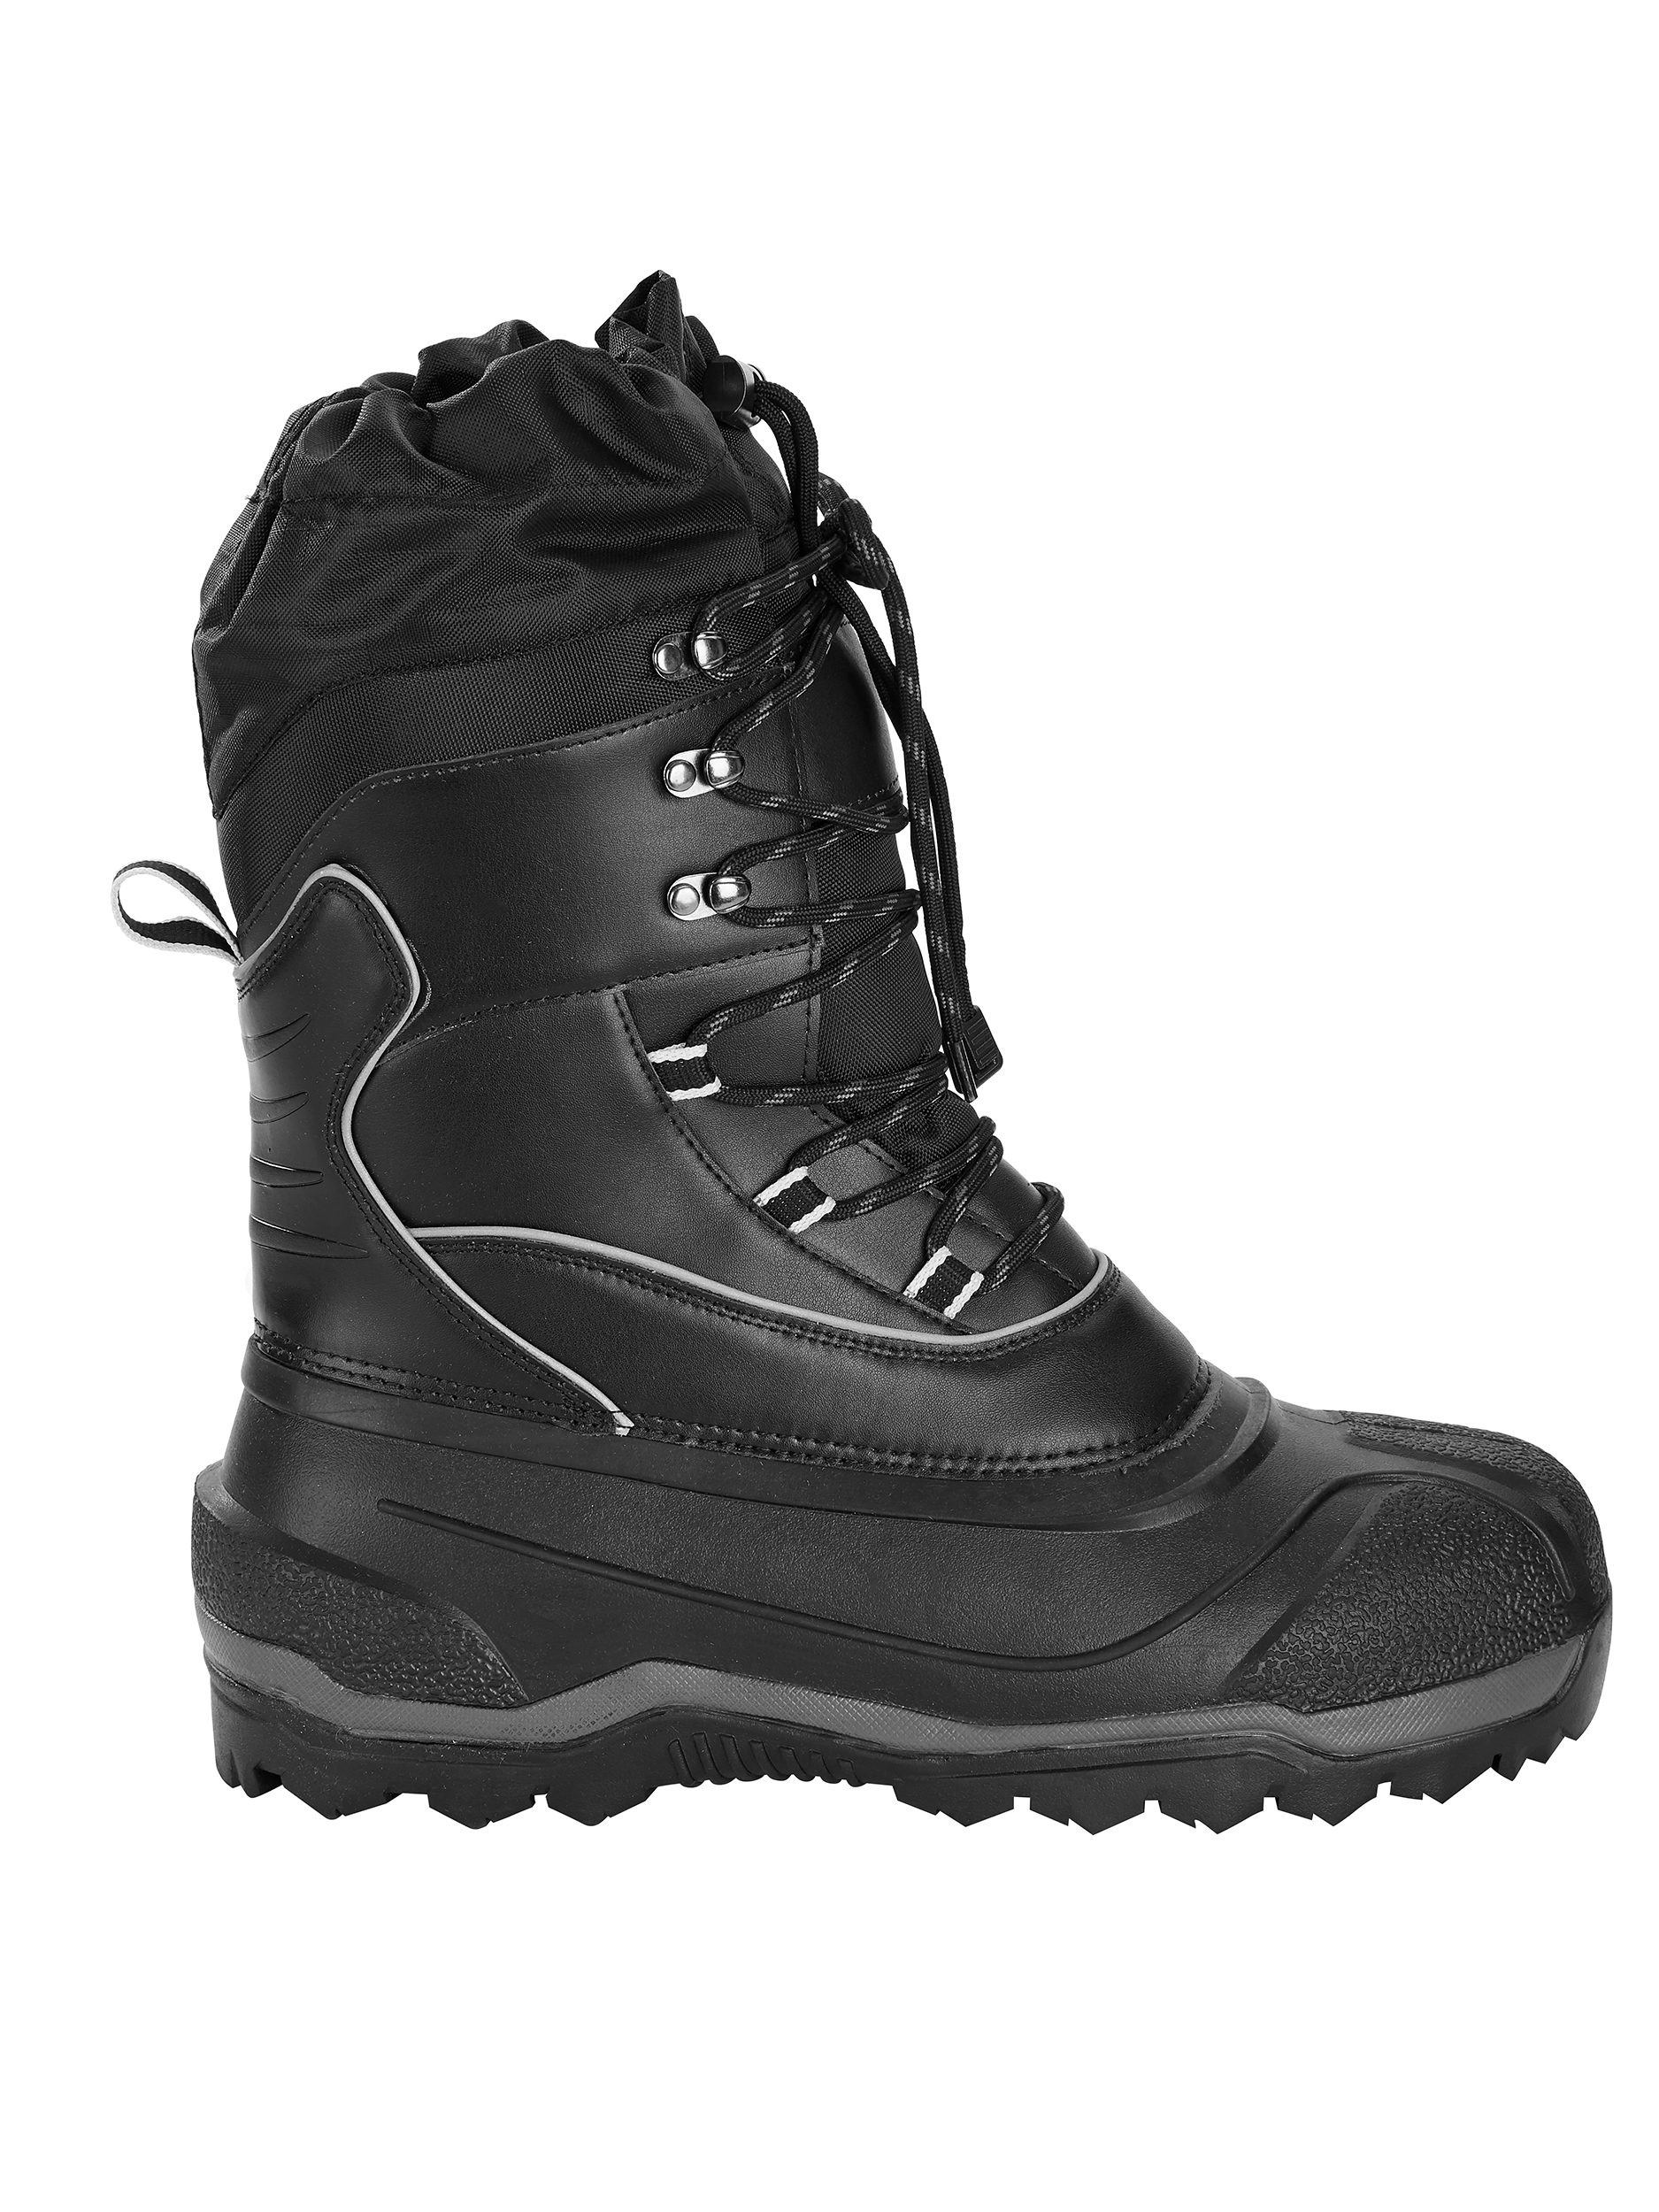 George Men's Insulated Extreme Winter Boot - image 4 of 5